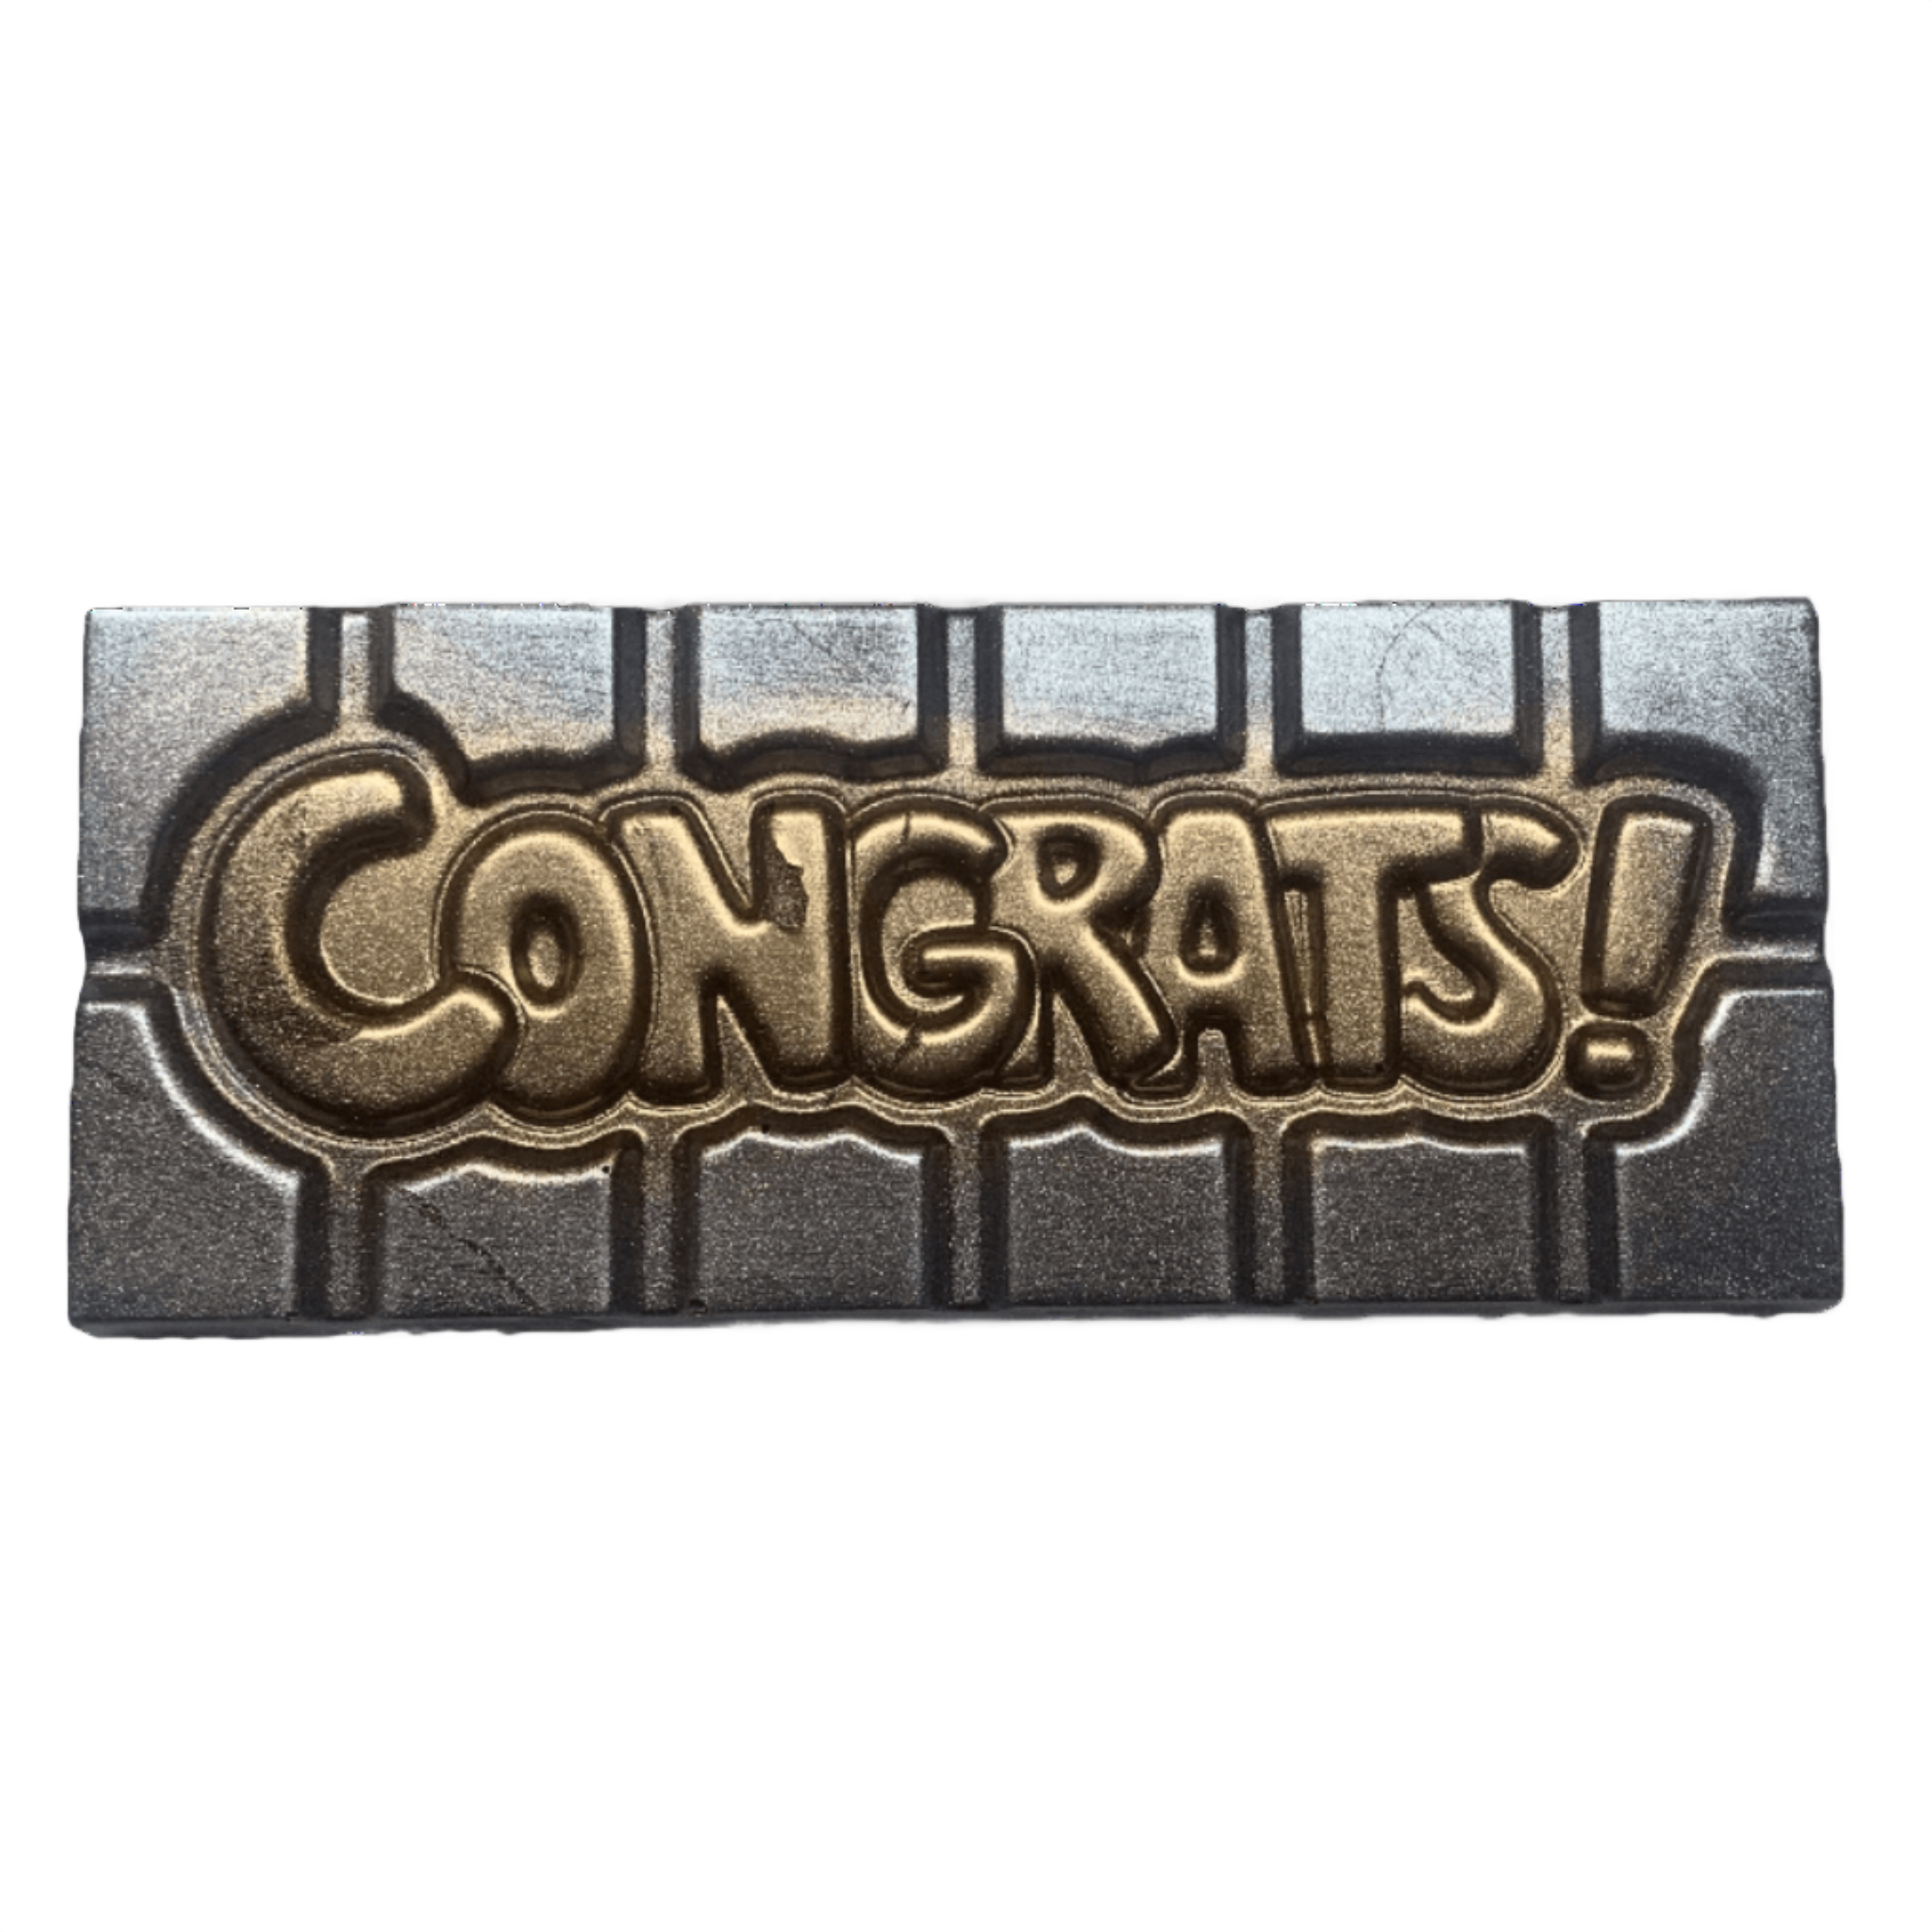 Chocolate bar which has Congrats written on it